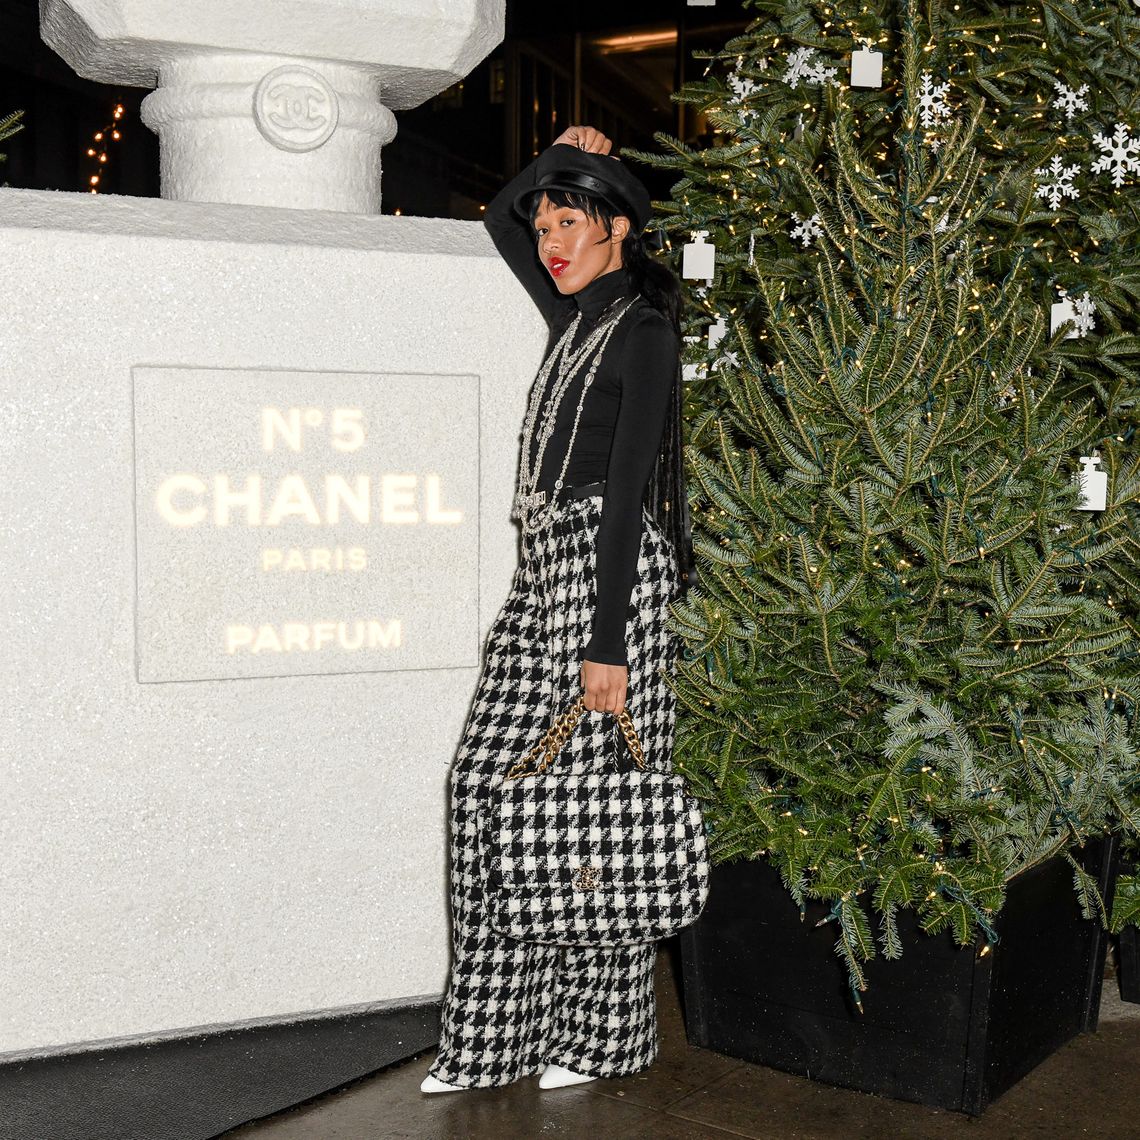 Chanel Opens Holiday Pop-up at Standard High Line With AR Experience